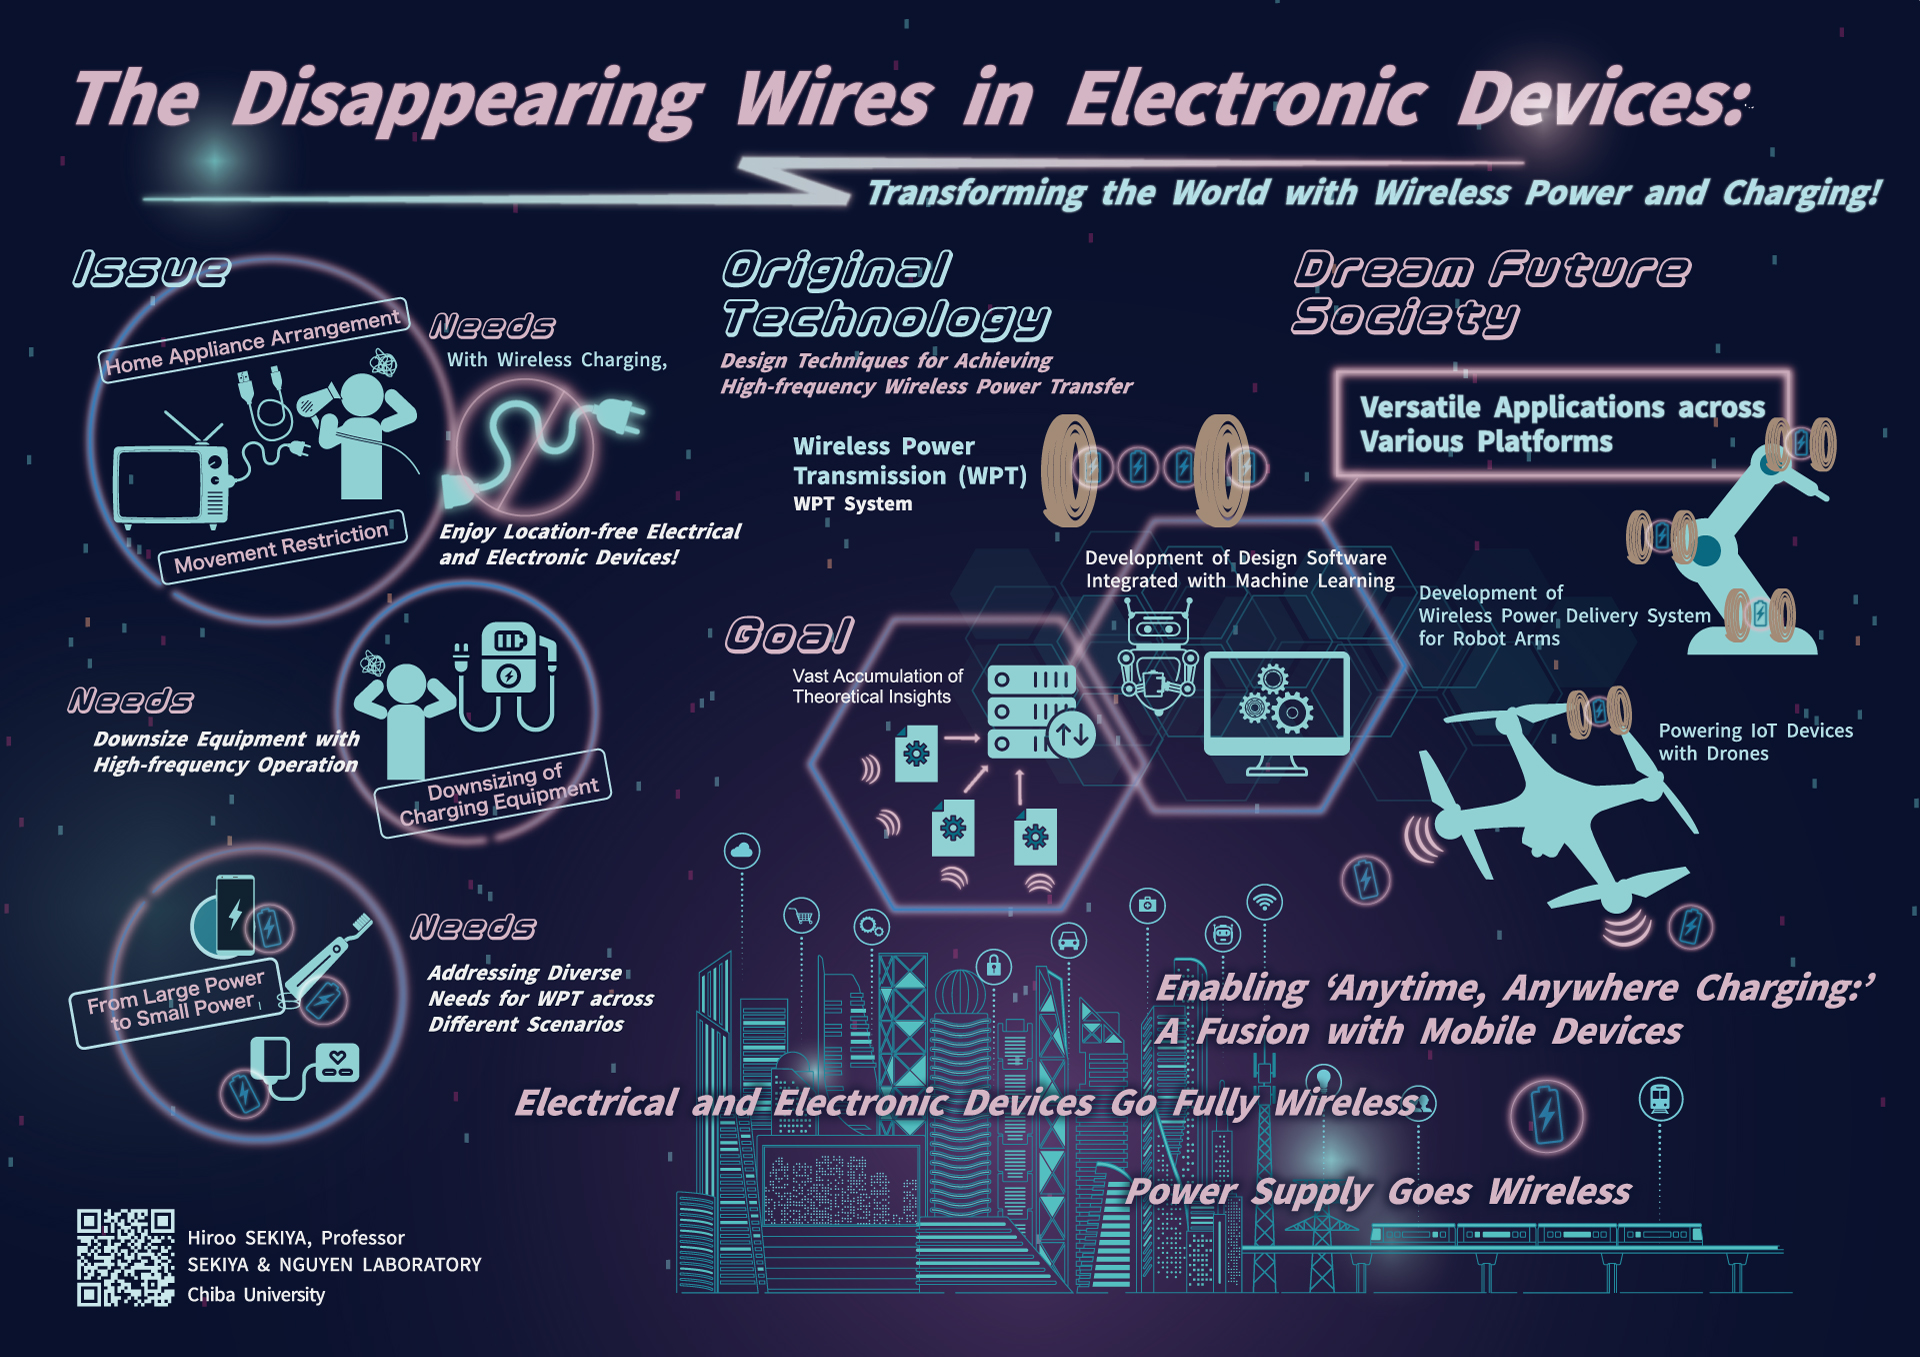 The Disappearing Wires in Electronic Devices:
Transforming the World with Wireless Power and Charging!